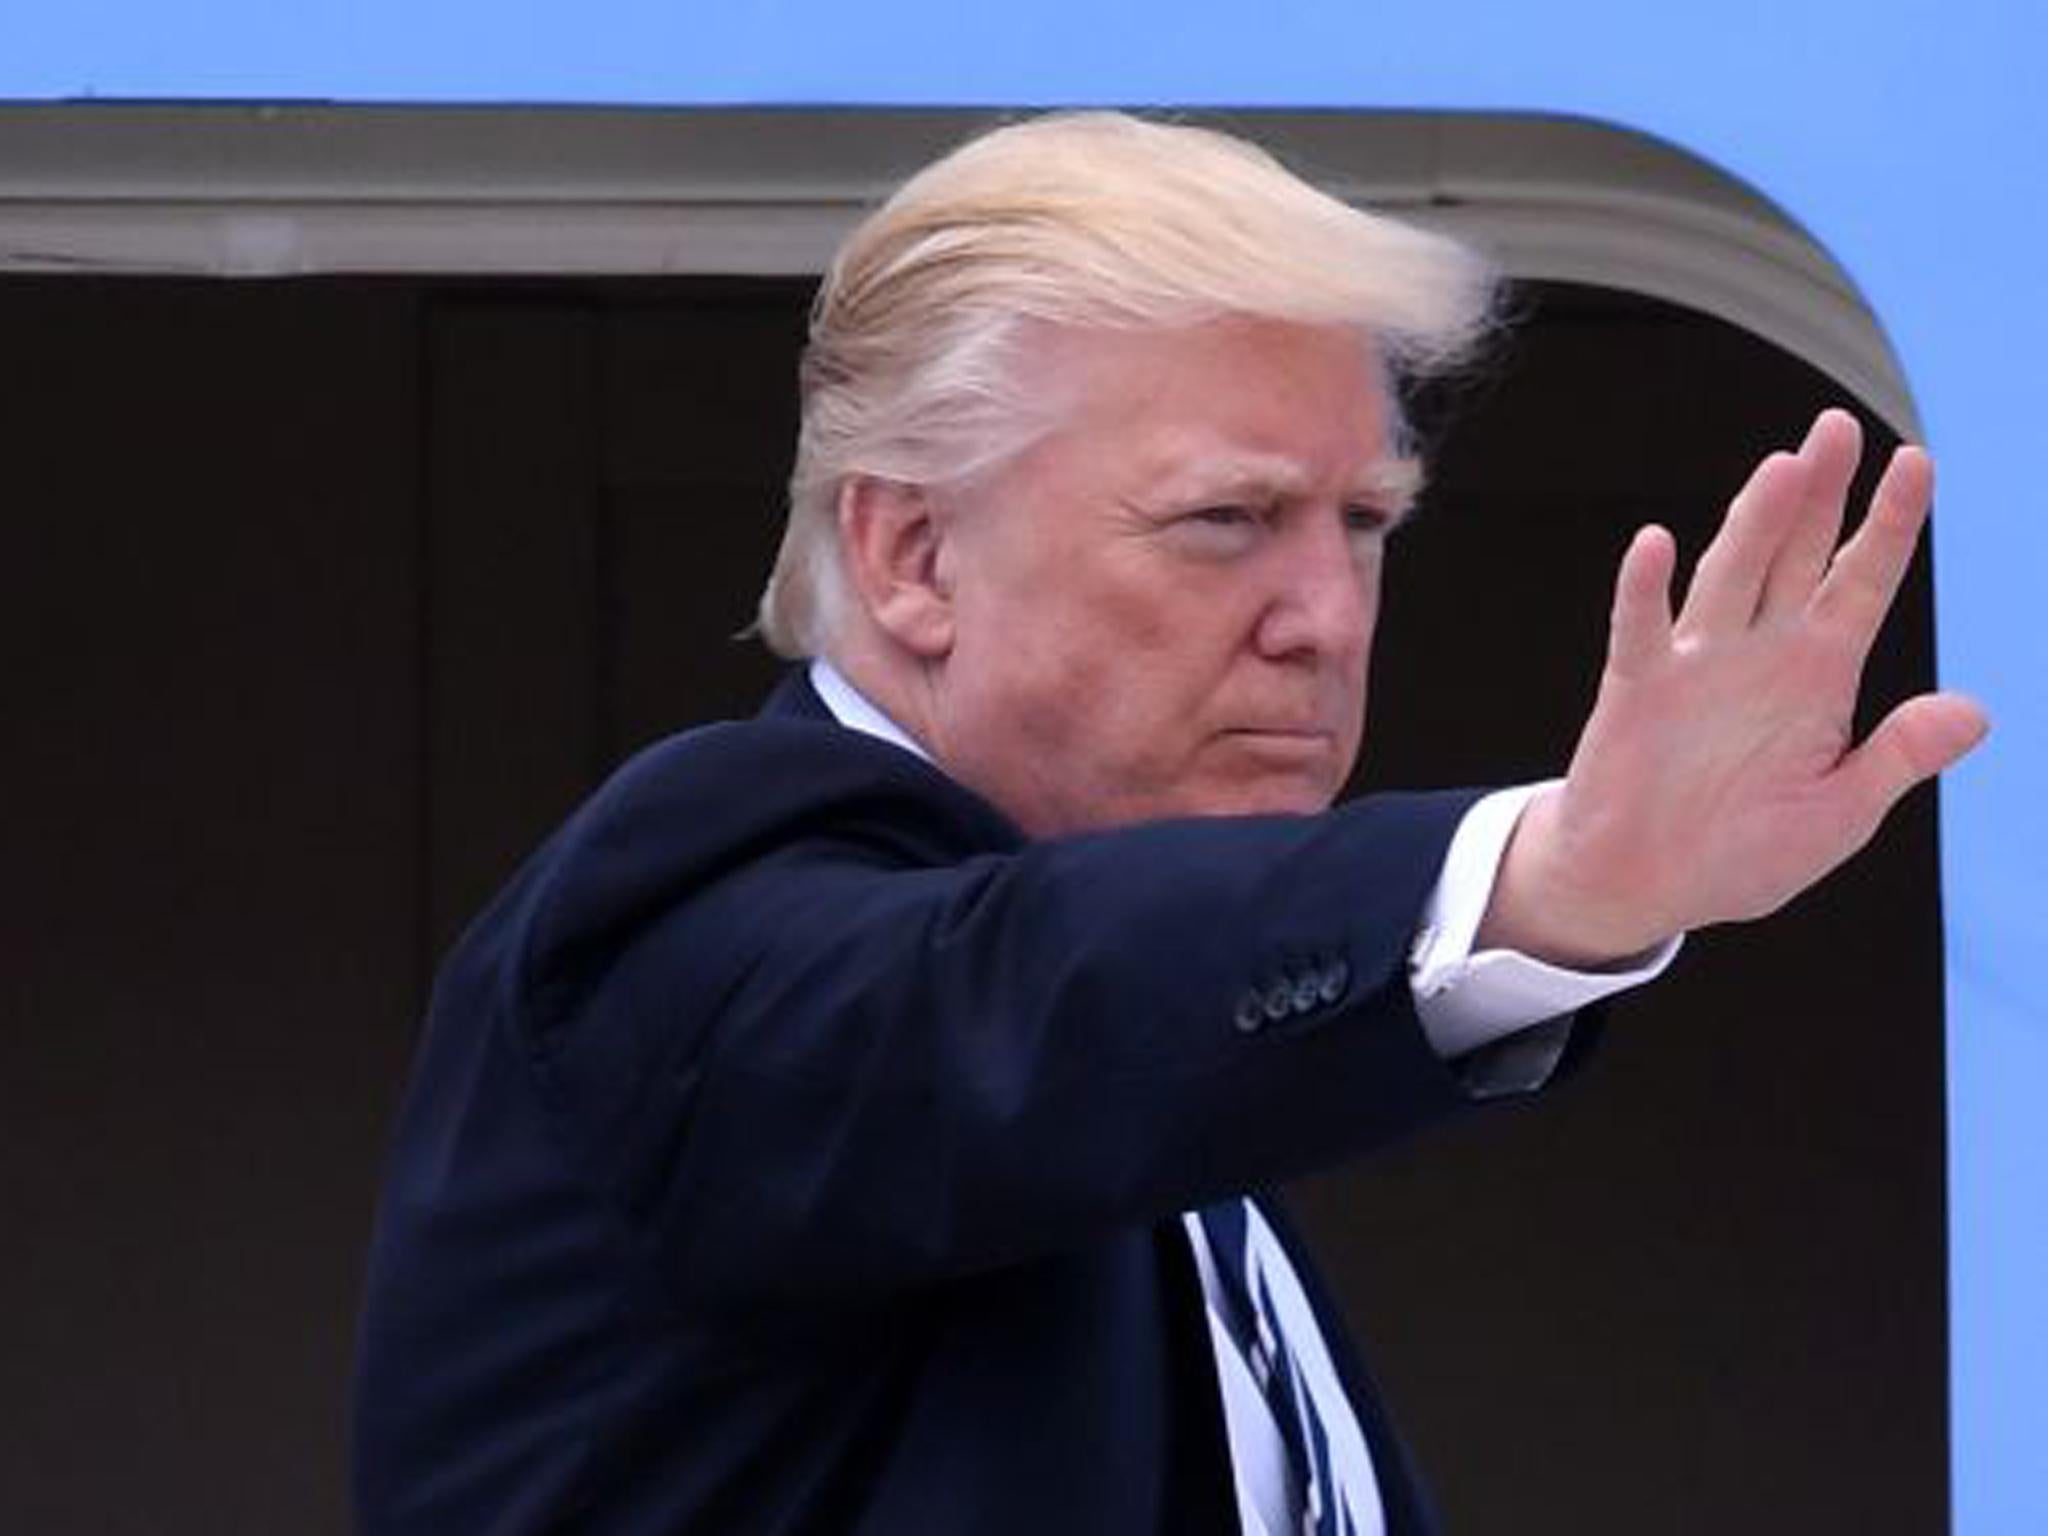 Donald Trump waves before boarding Air Force One